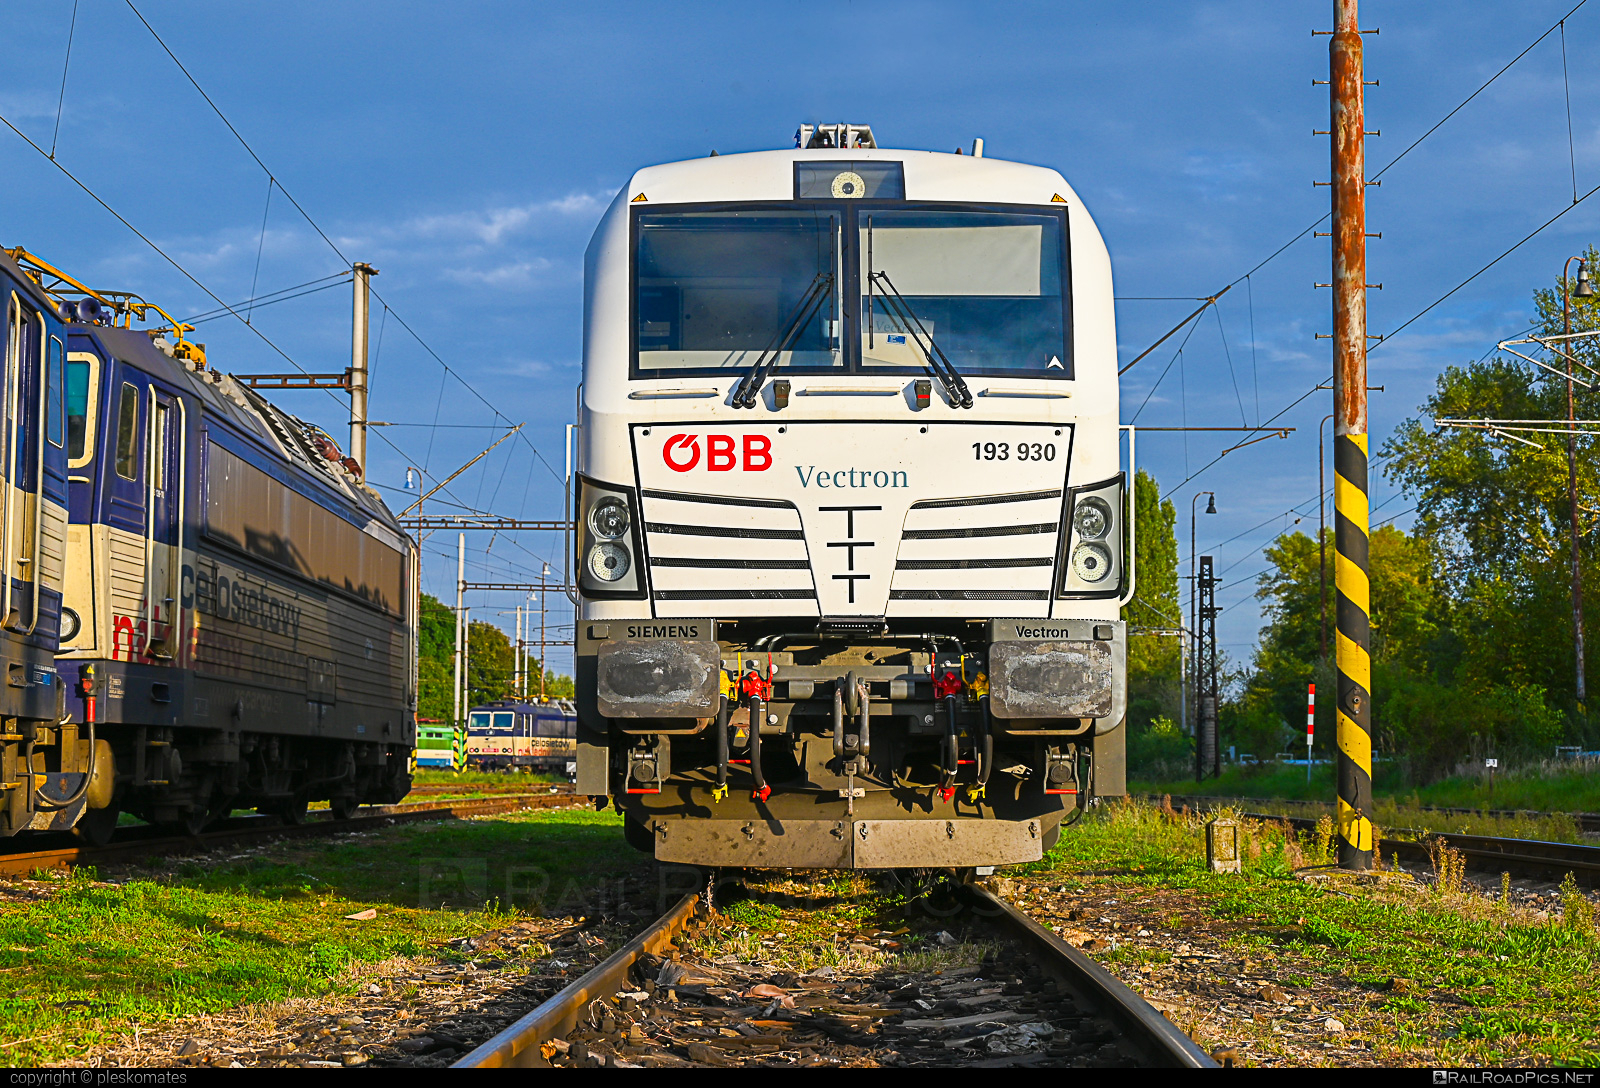 Siemens Vectron AC DPM - 193 930 operated by Siemens Mobility GmbH #SiemensMobility #SiemensMobilityGmbH #obb #siemens #siemensVectron #siemensVectronACDPM #vectron #vectronACDPM